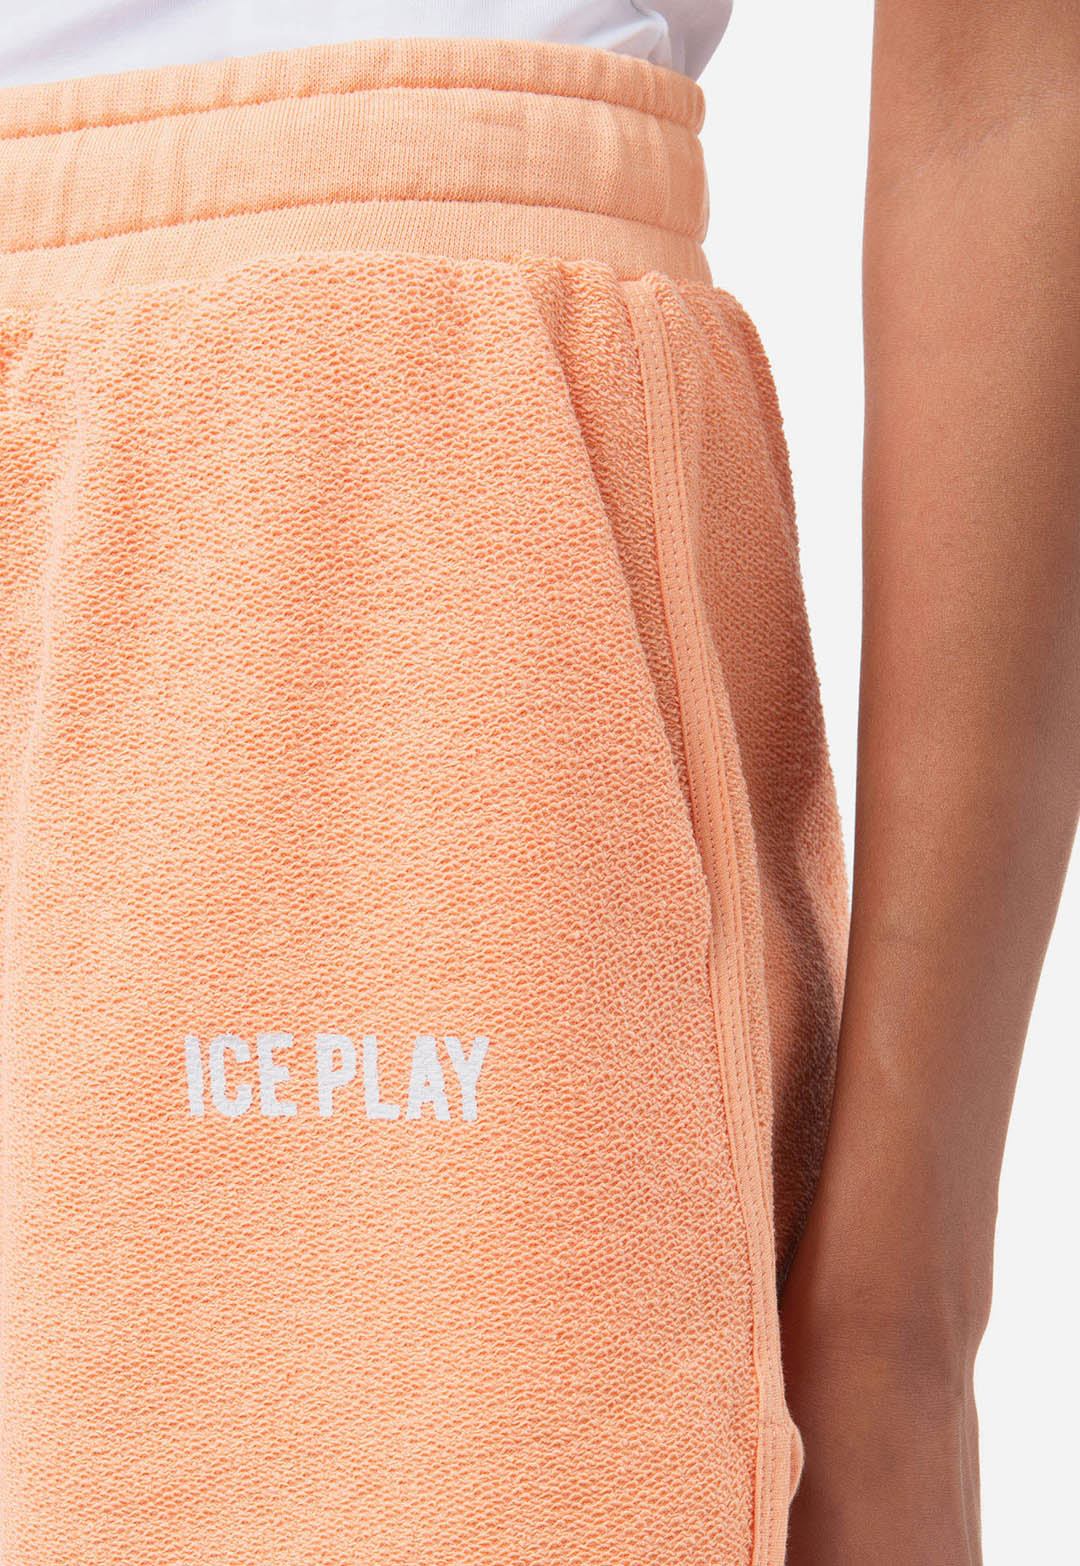 Iceplay